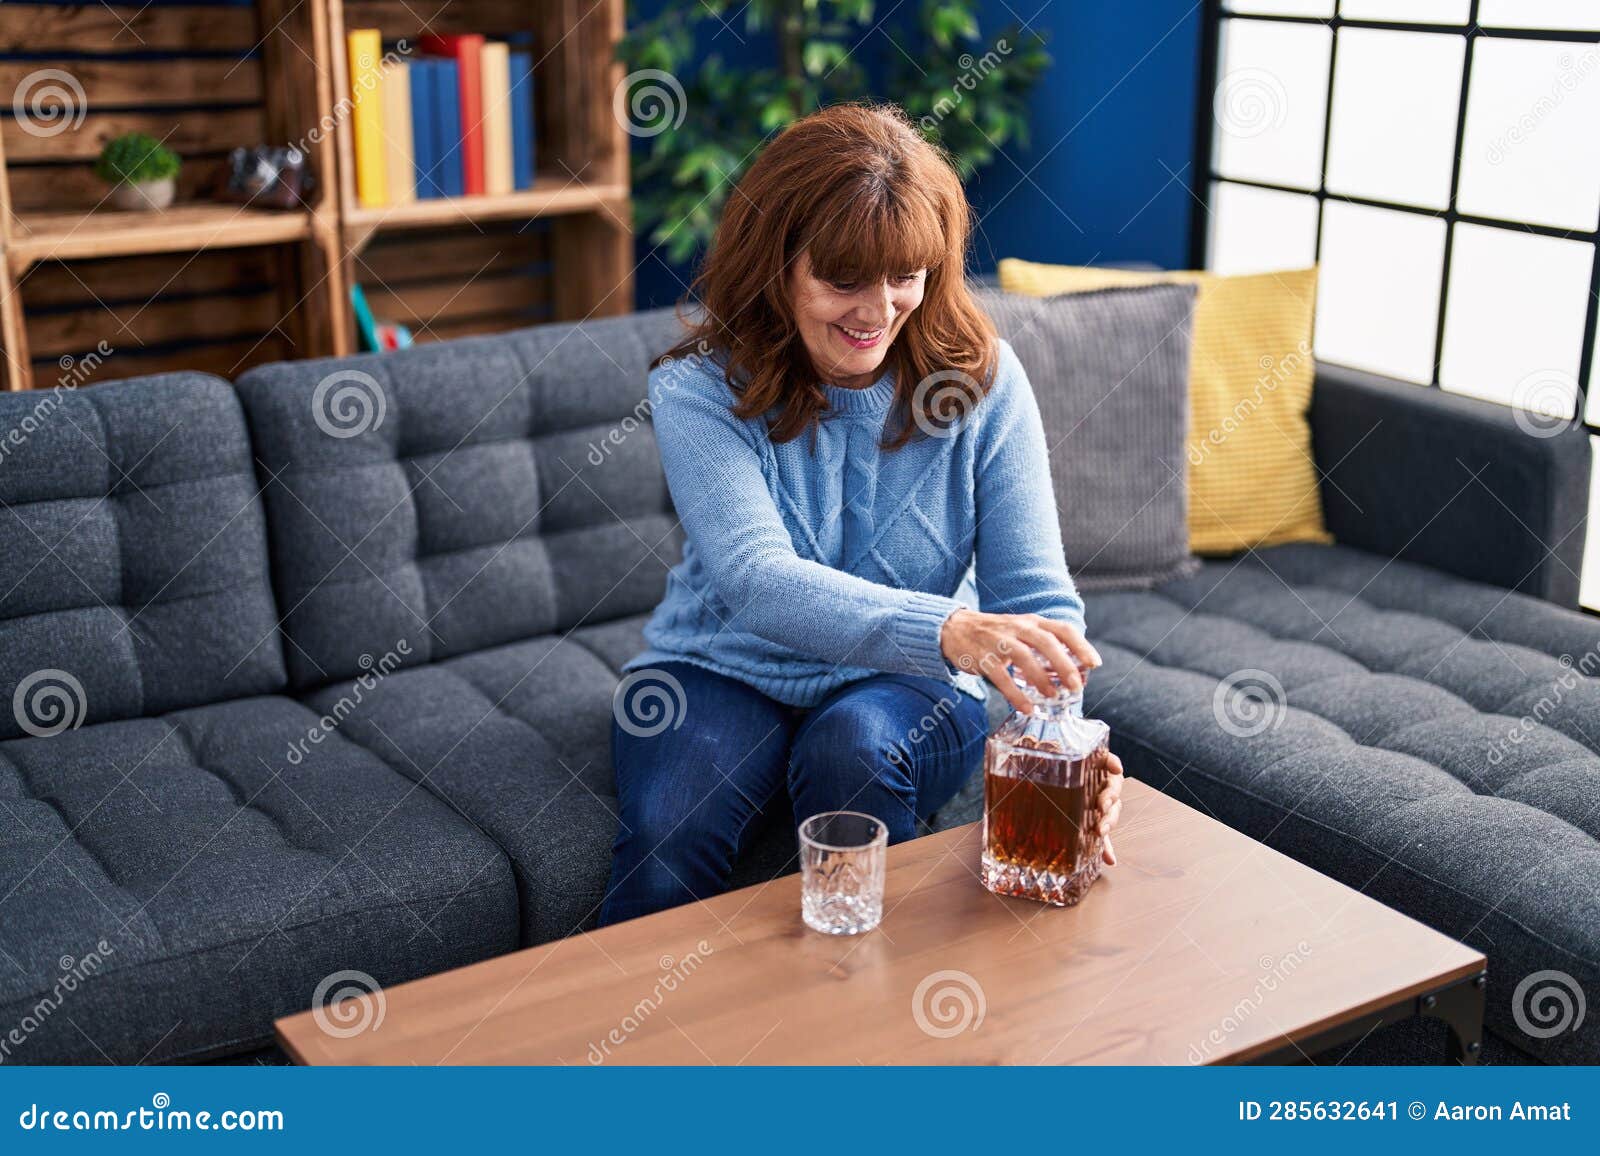 middle age woman drinking licor sitting on sofa at home